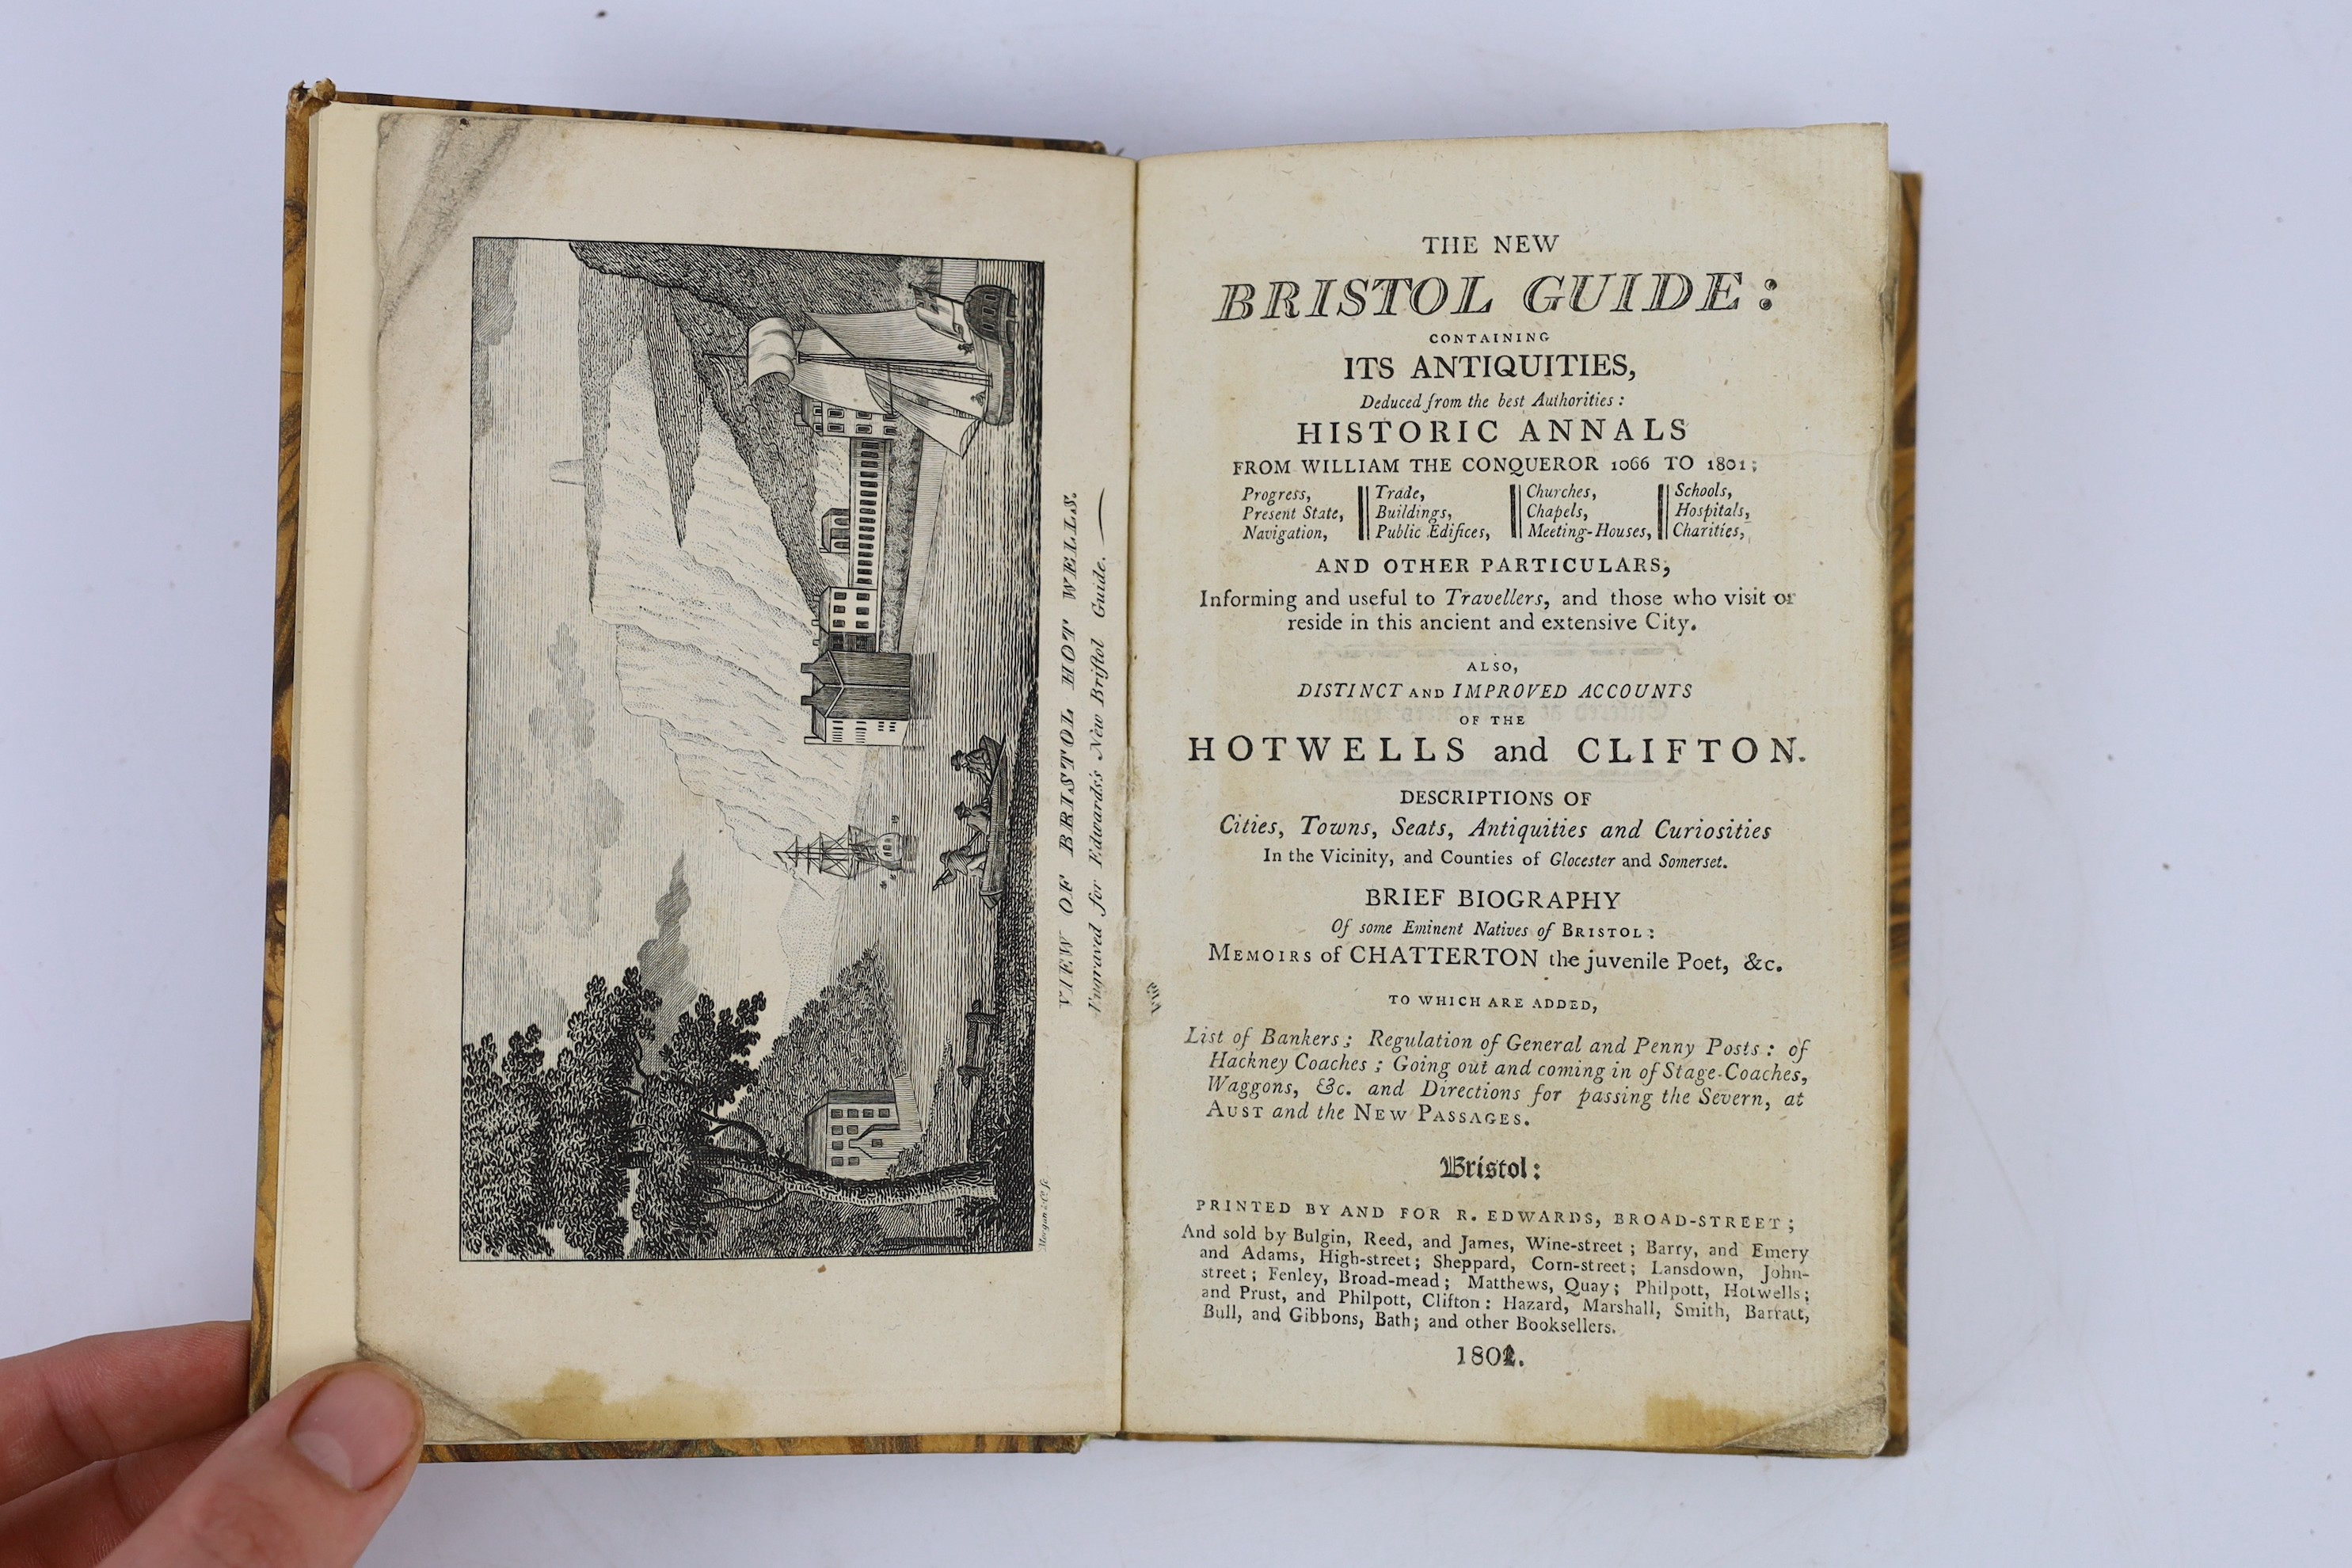 SOMERSET, BRISTOL: Bristoliensis - The Bristol Guide including a Description of the Curiosities of its Vicinity. 3rd edition revised and considerably enlarged. original paperboards, rebacked cloth, retaining most of orig